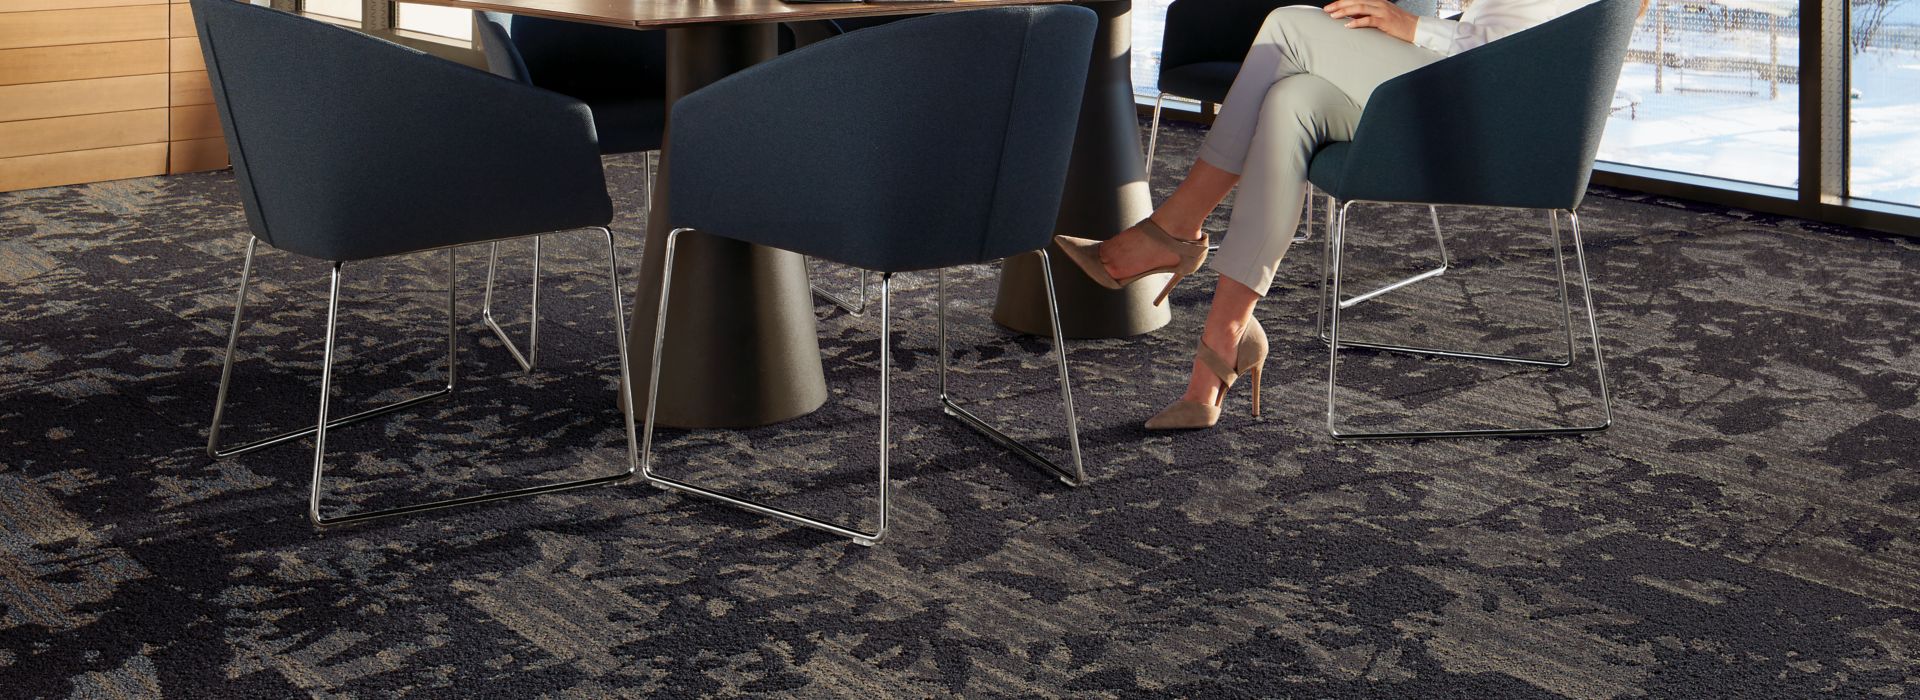 Interface Shading plank carpet tile in seating area with table and chairs